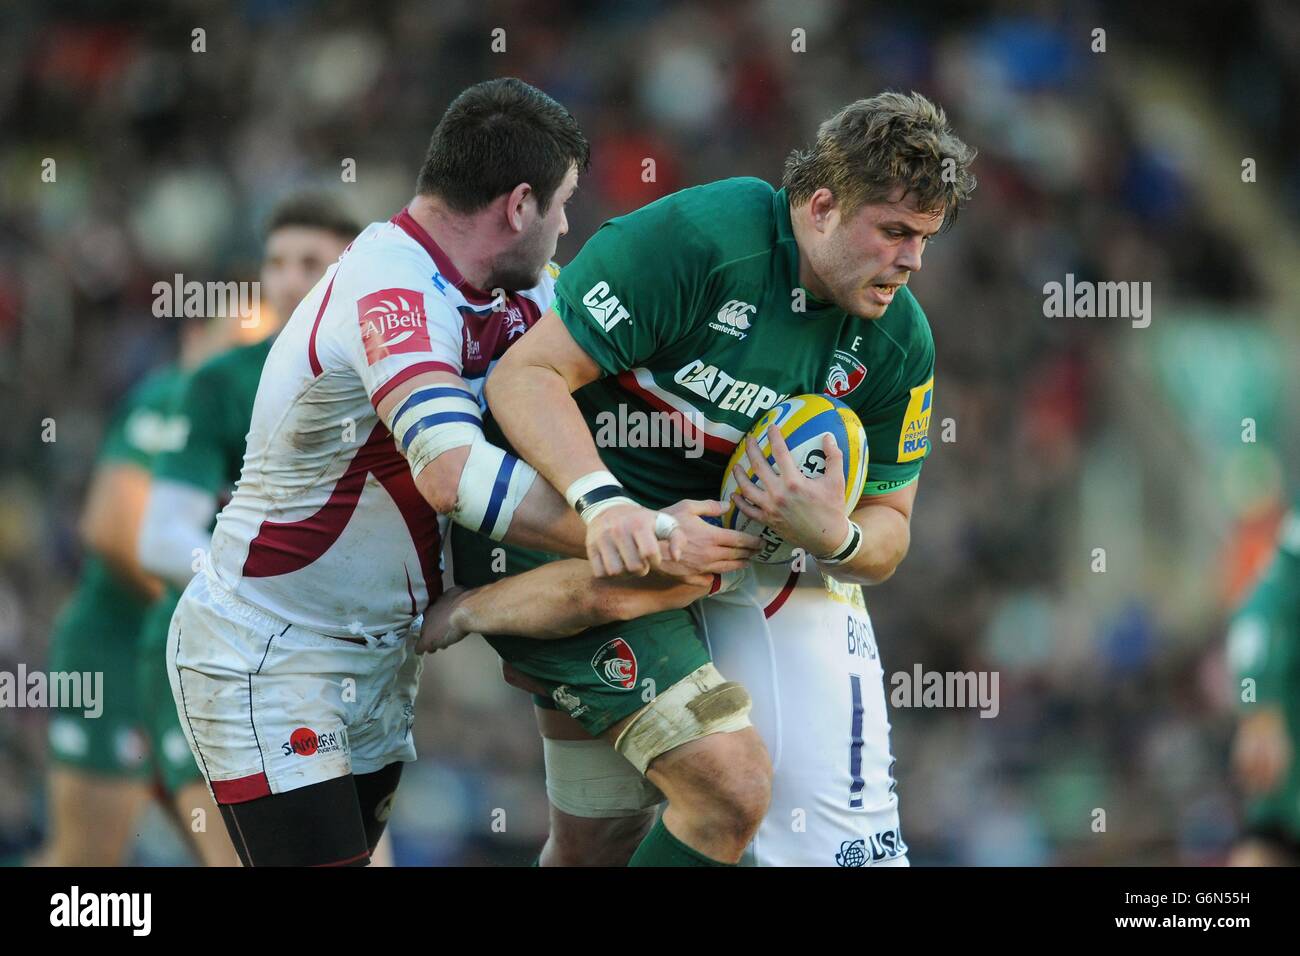 Leicester Tigers' Ed Slater is tackled by Sale Sharks' Marc Jones (left) and Tom Brady (right) during the Aviva Premiership match at Welford Road, Leicester. Stock Photo